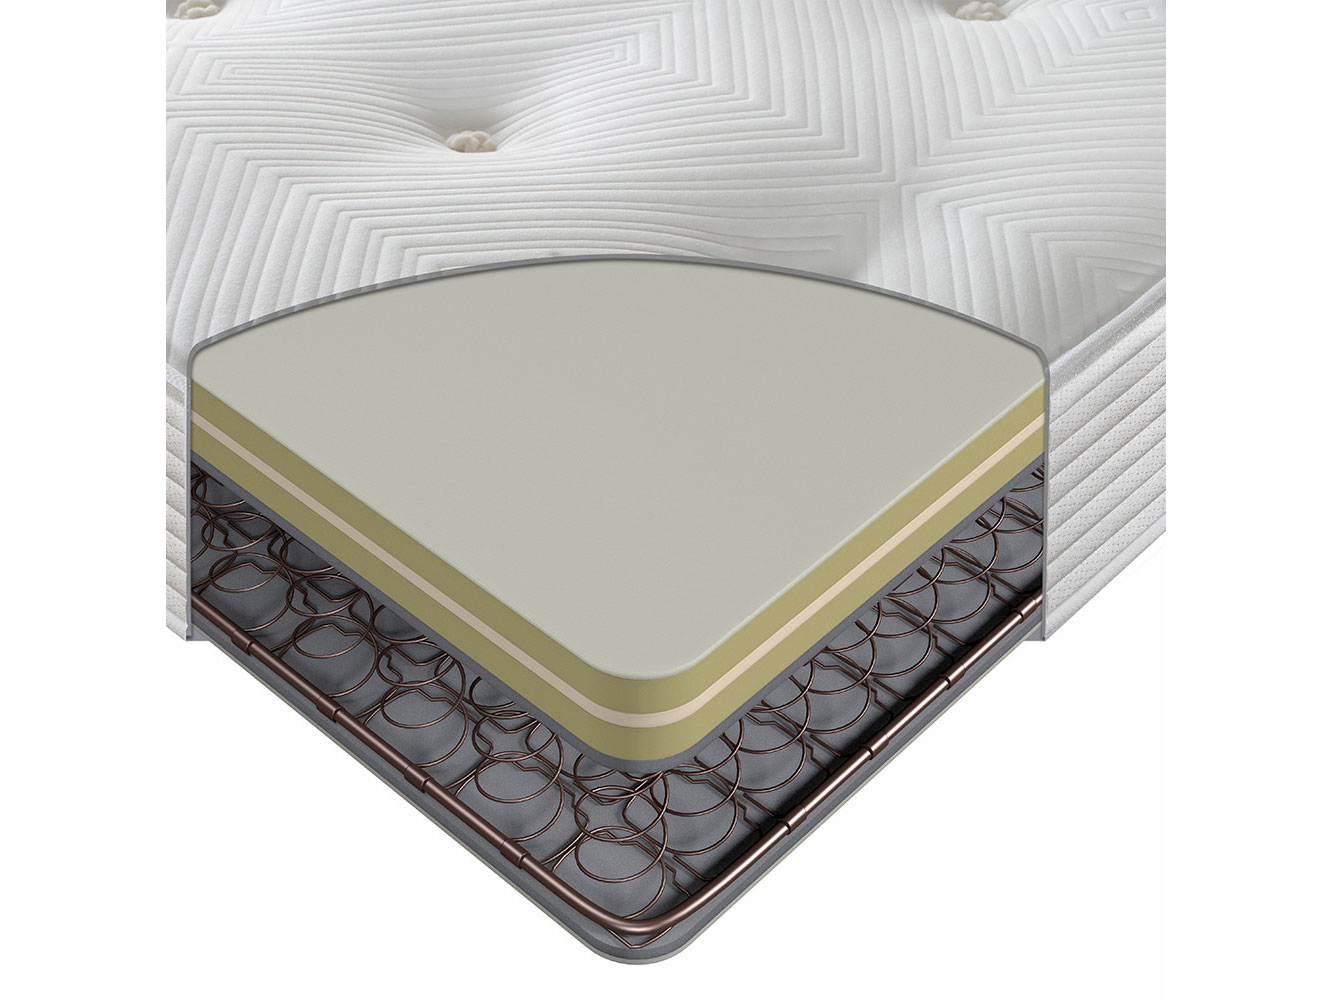 4ft6 Double Sealy ActivSleep Ortho Extra Firm Mattress